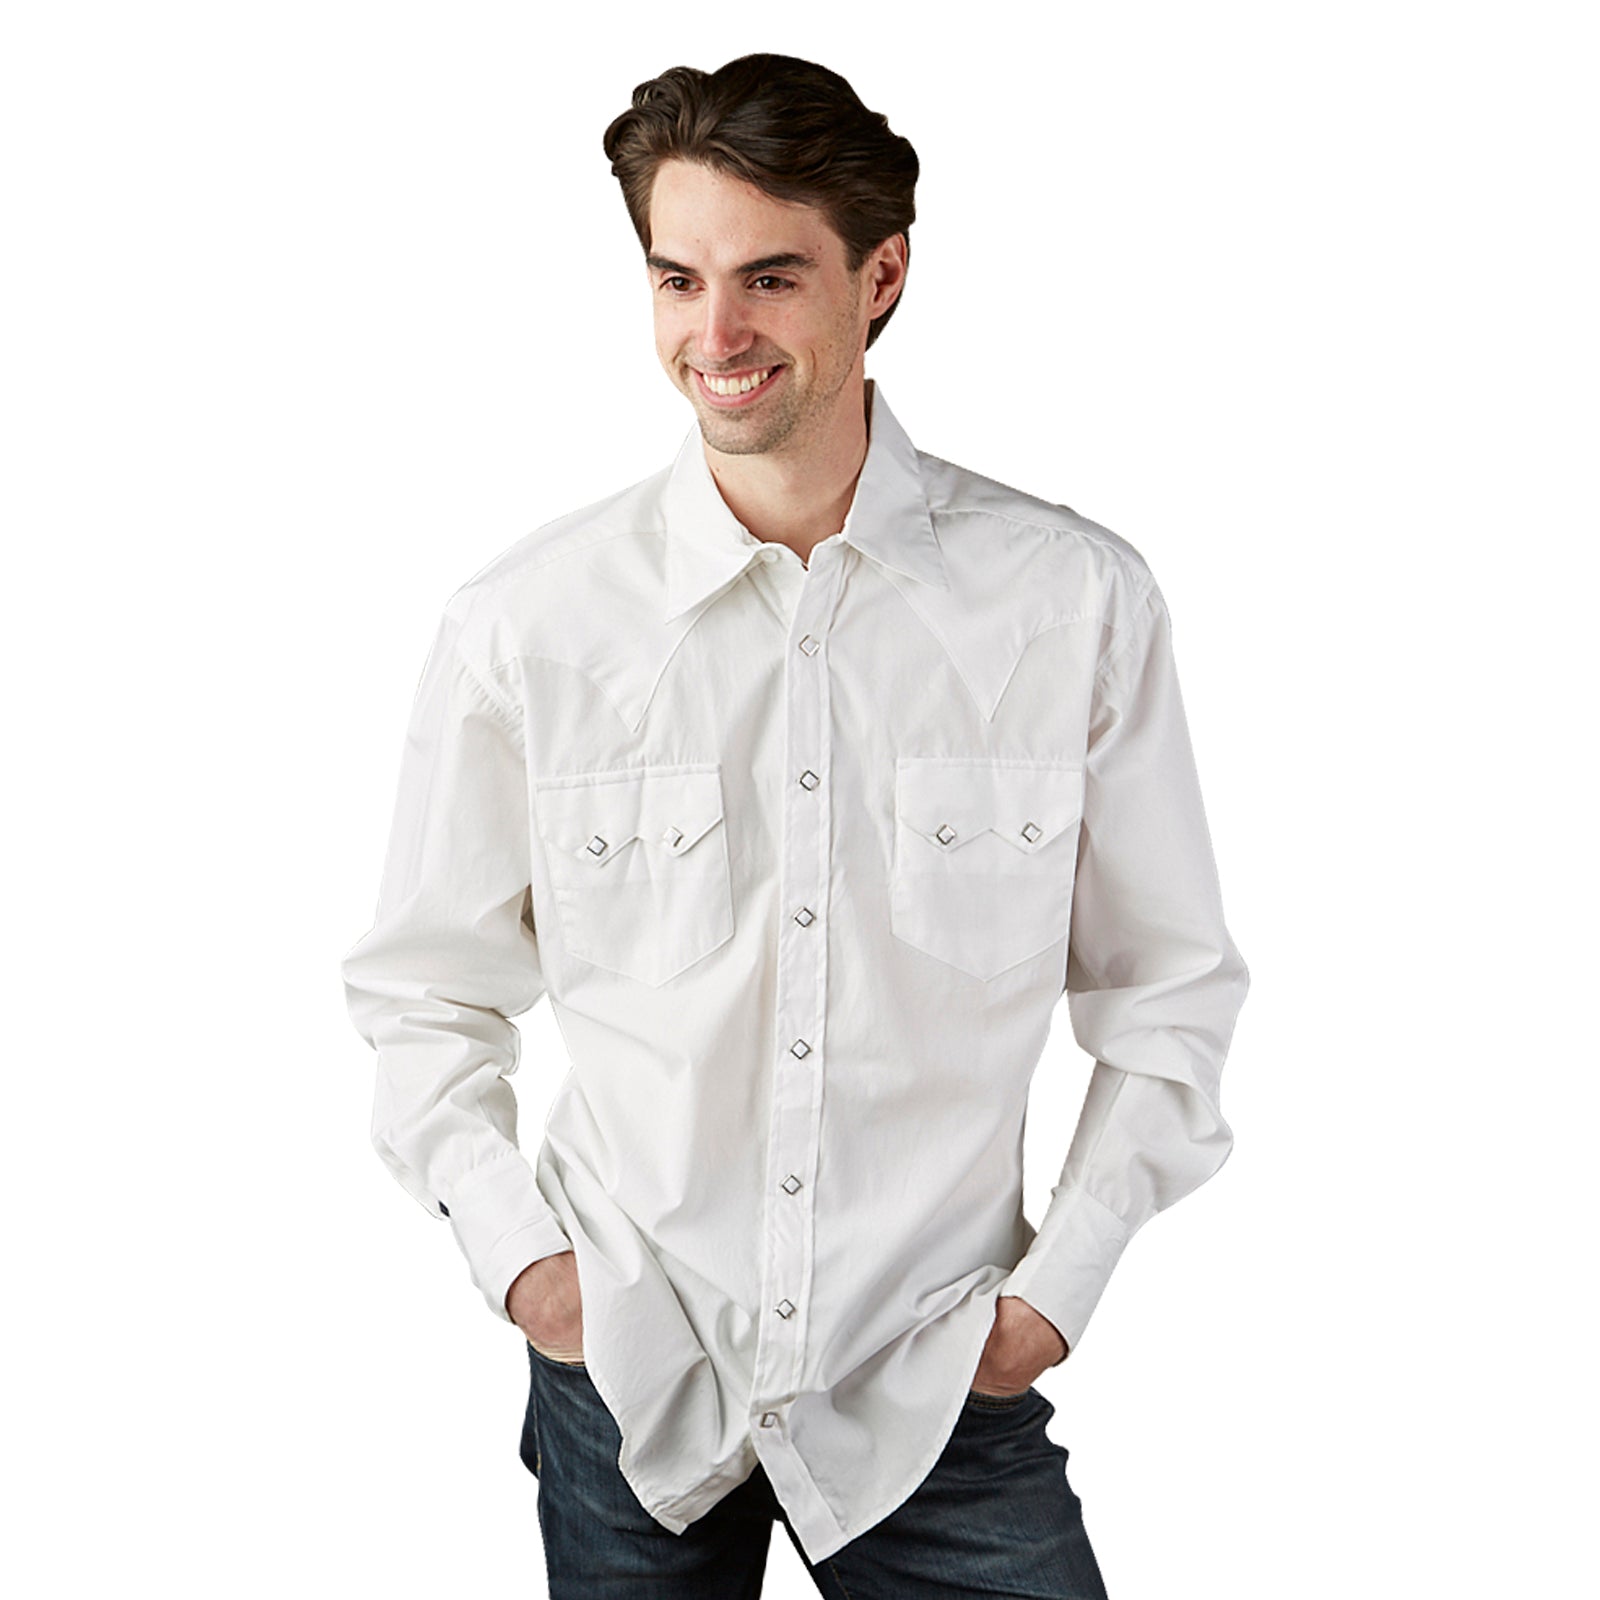 Men's Classic Pima Cotton Solid White Western Shirt with White Snaps - Rockmount